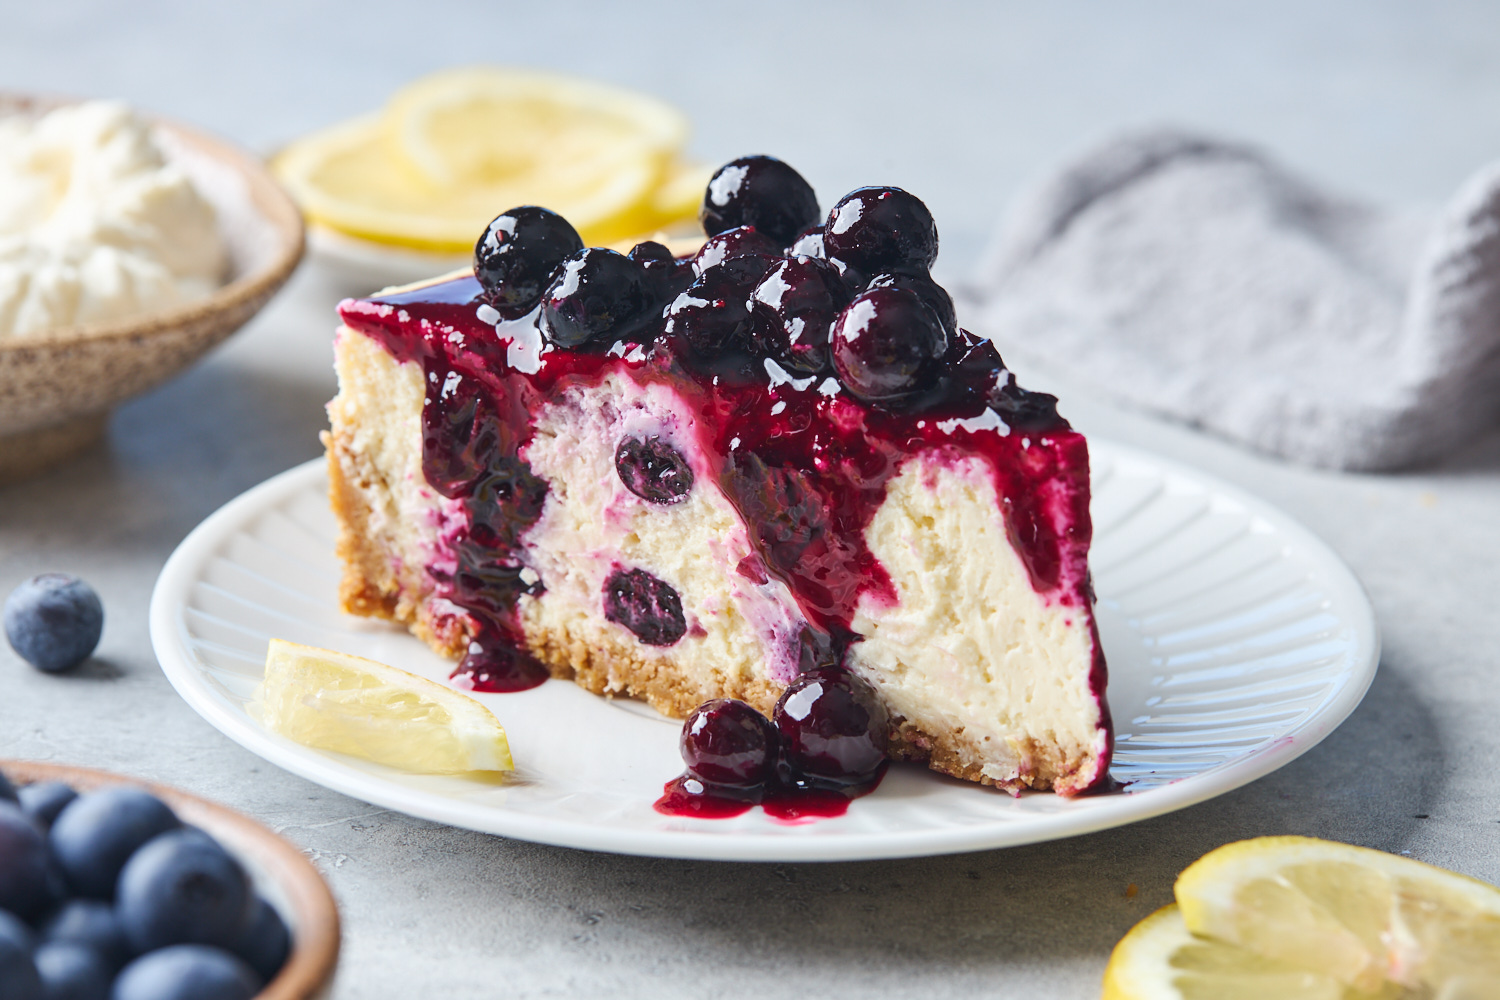 Baked Vegan Blueberry Cheesecake | Heartful Table